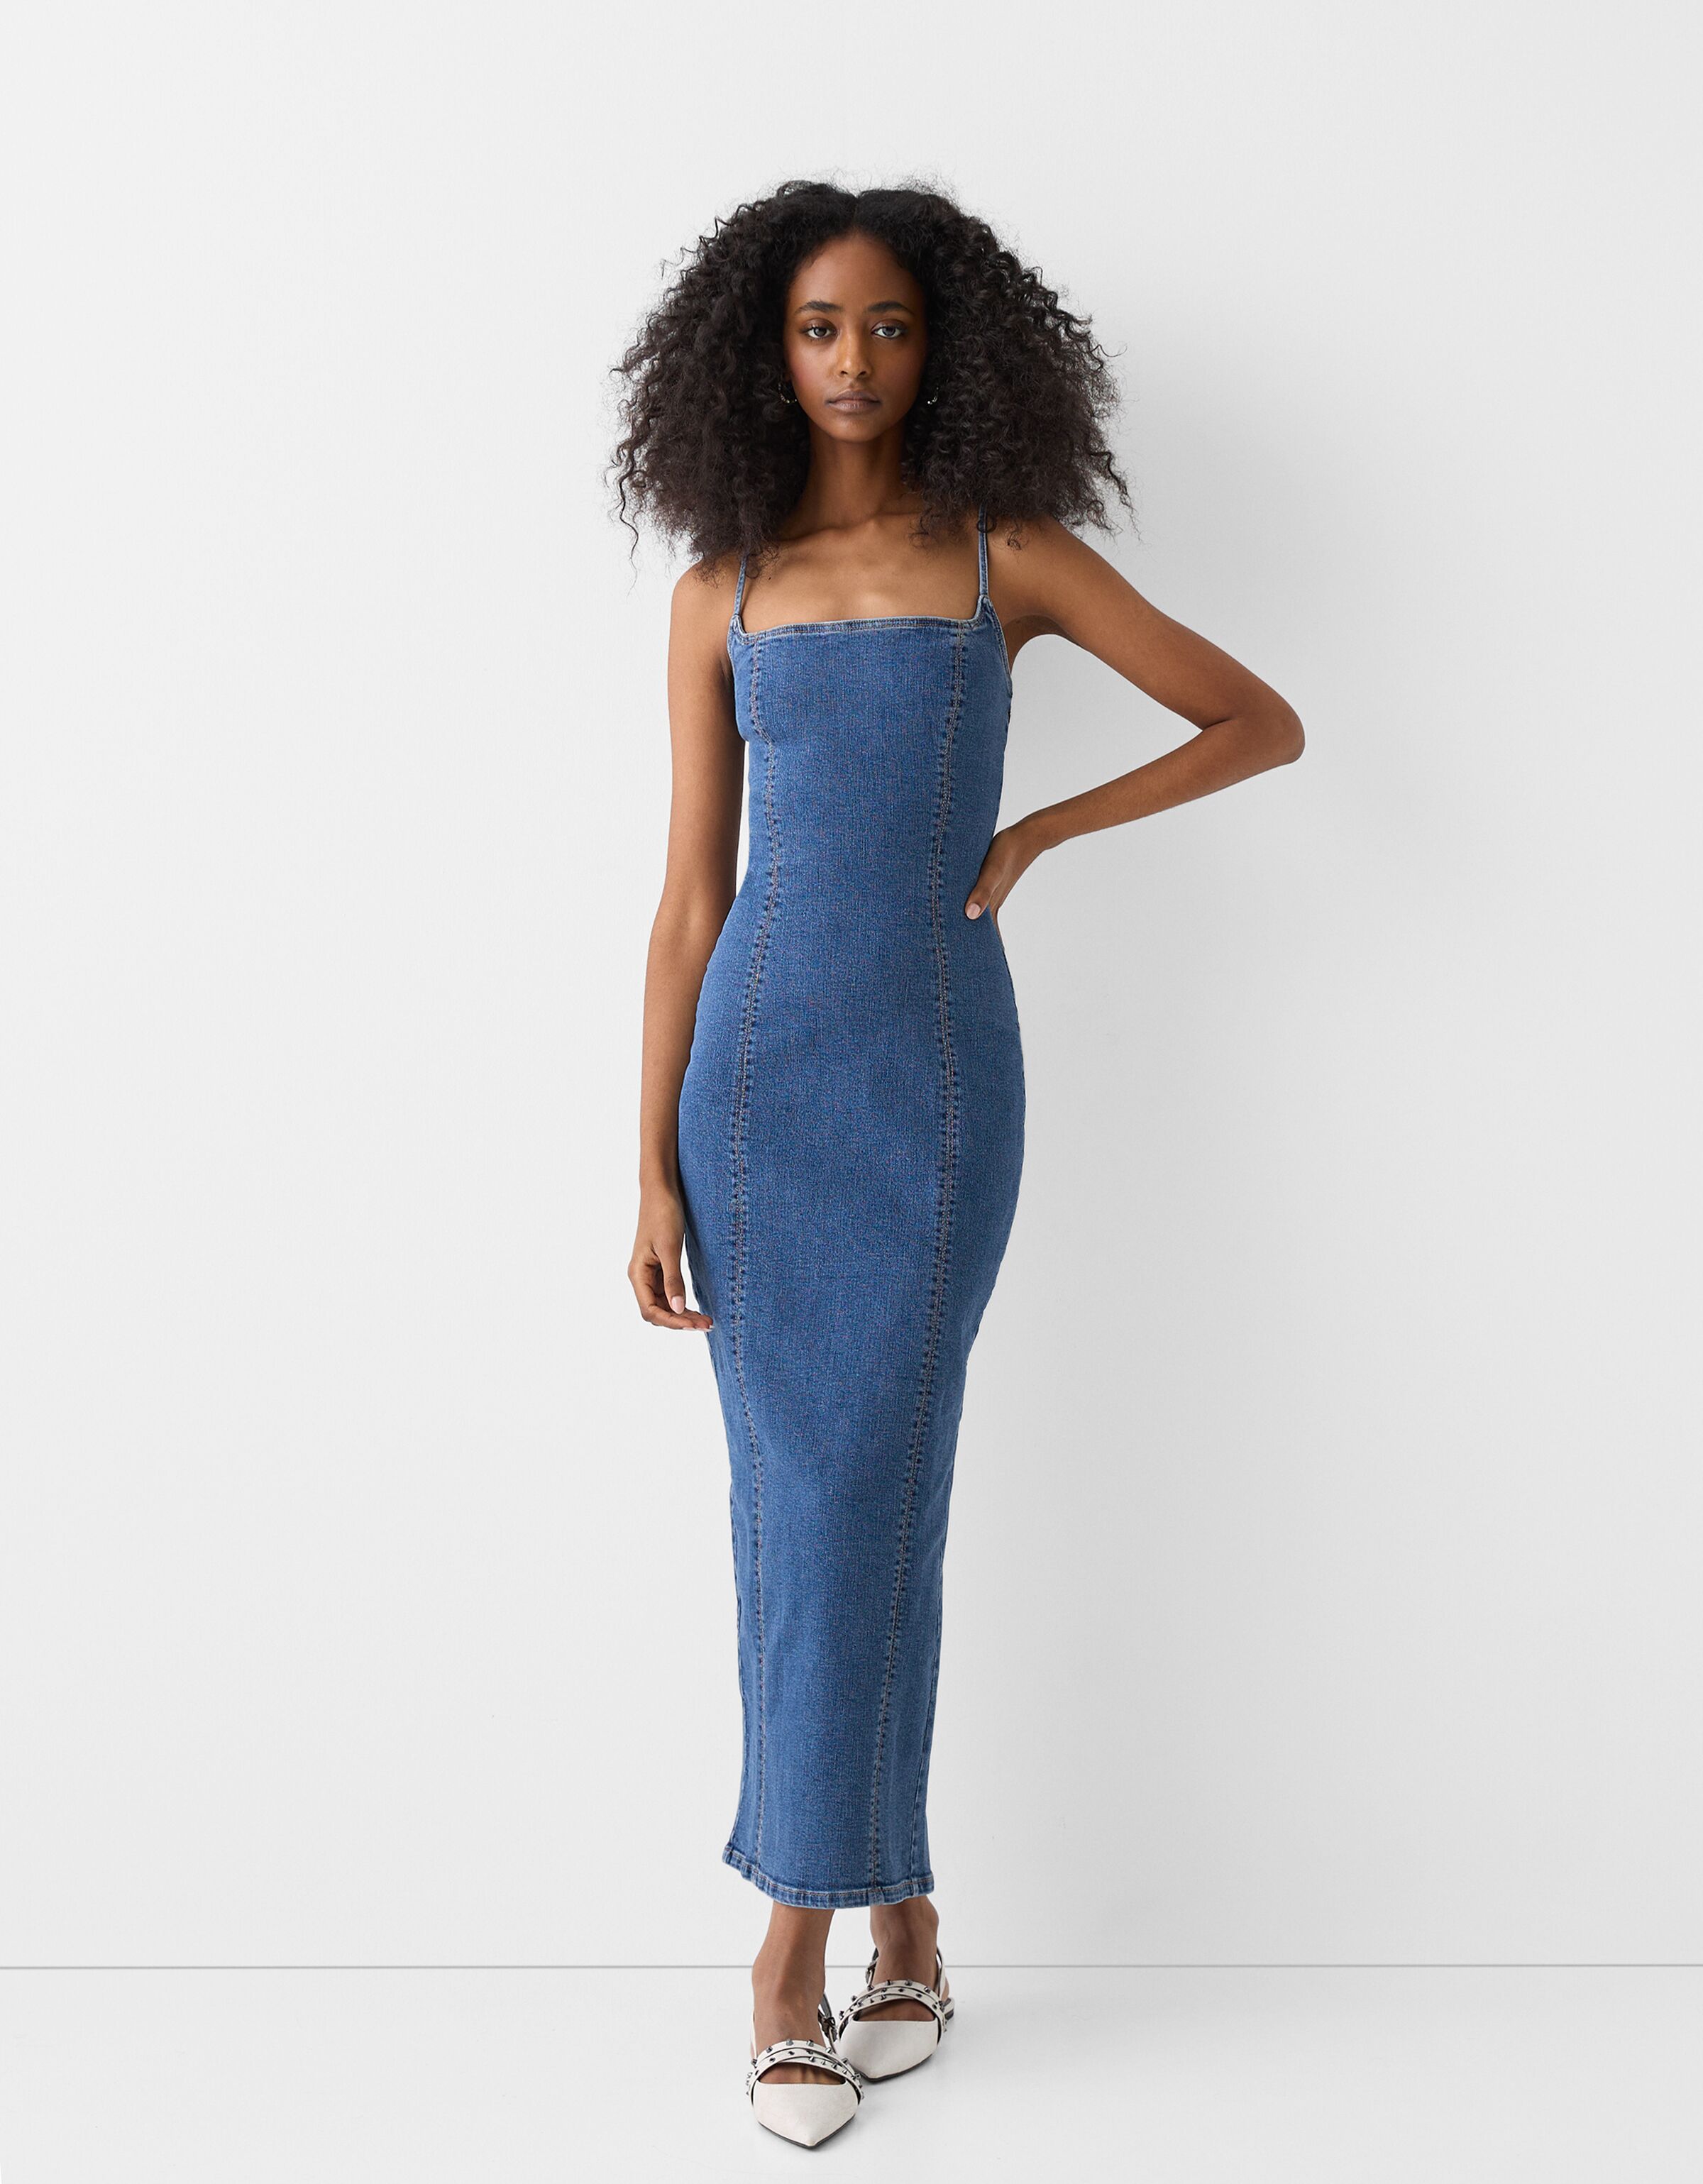 Women's Denim Dress: A Classy and Comfortable Fashion Statement –  Jeans4you.shop